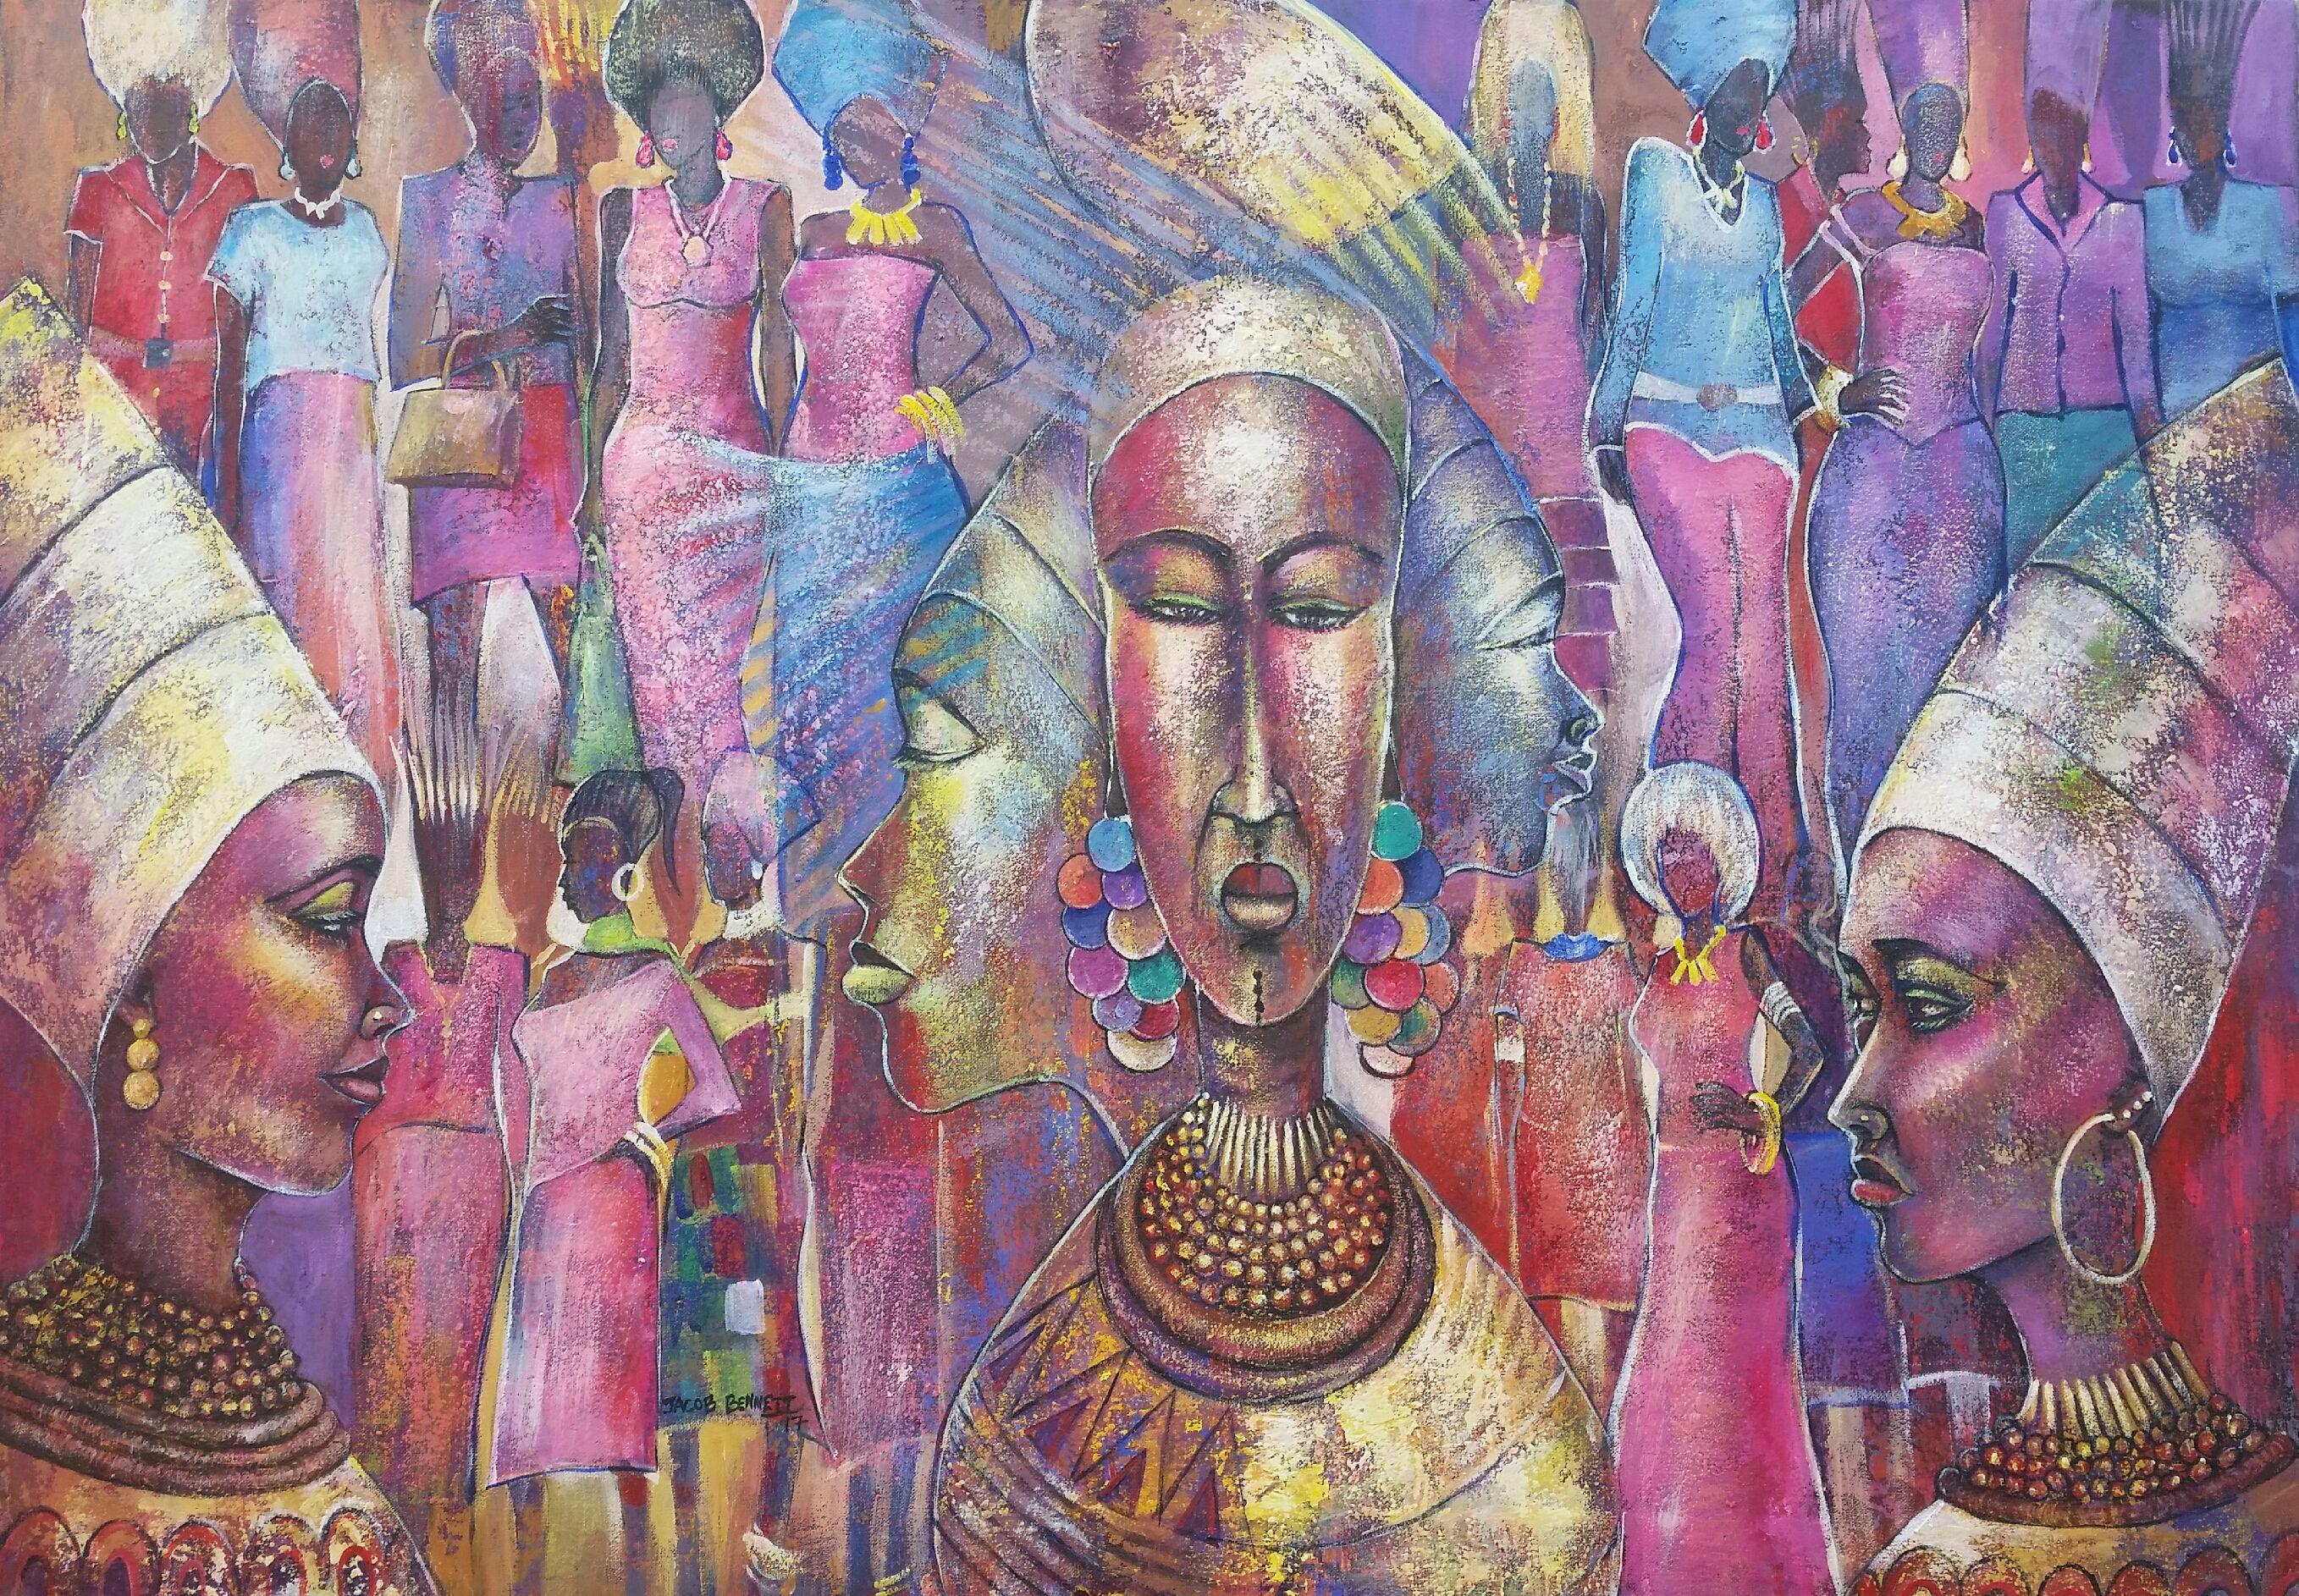 A parade of models have been depicted in this painting displaying their beauty,attire and jewellery. Its show time and every model is at her best showing her beauty ,body shape,attire and expensive jewellery. A few faces have been made to stand